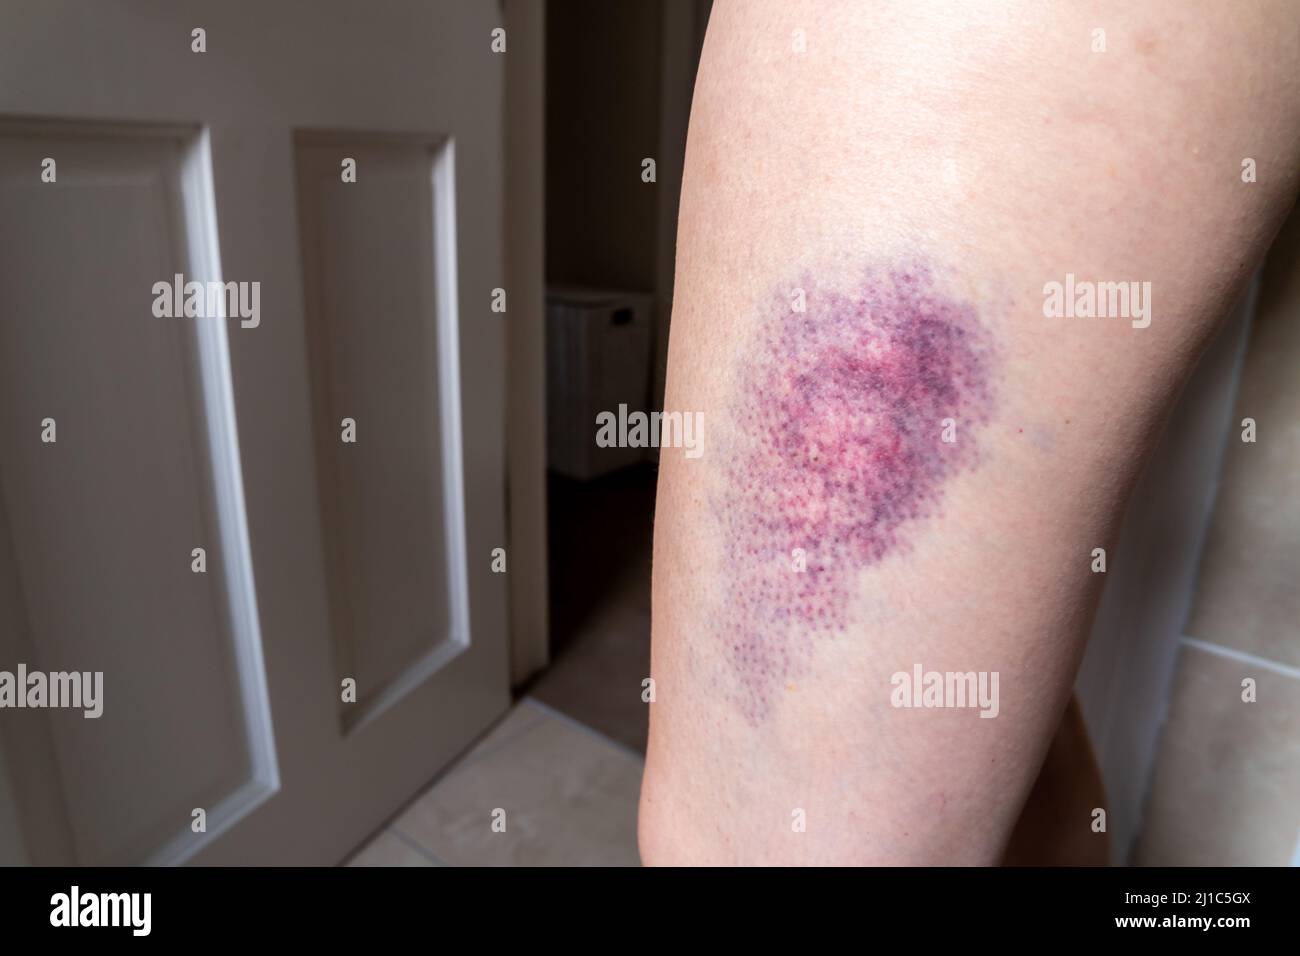 Terrible bruise on the upper leg of a woman. Stock Photo